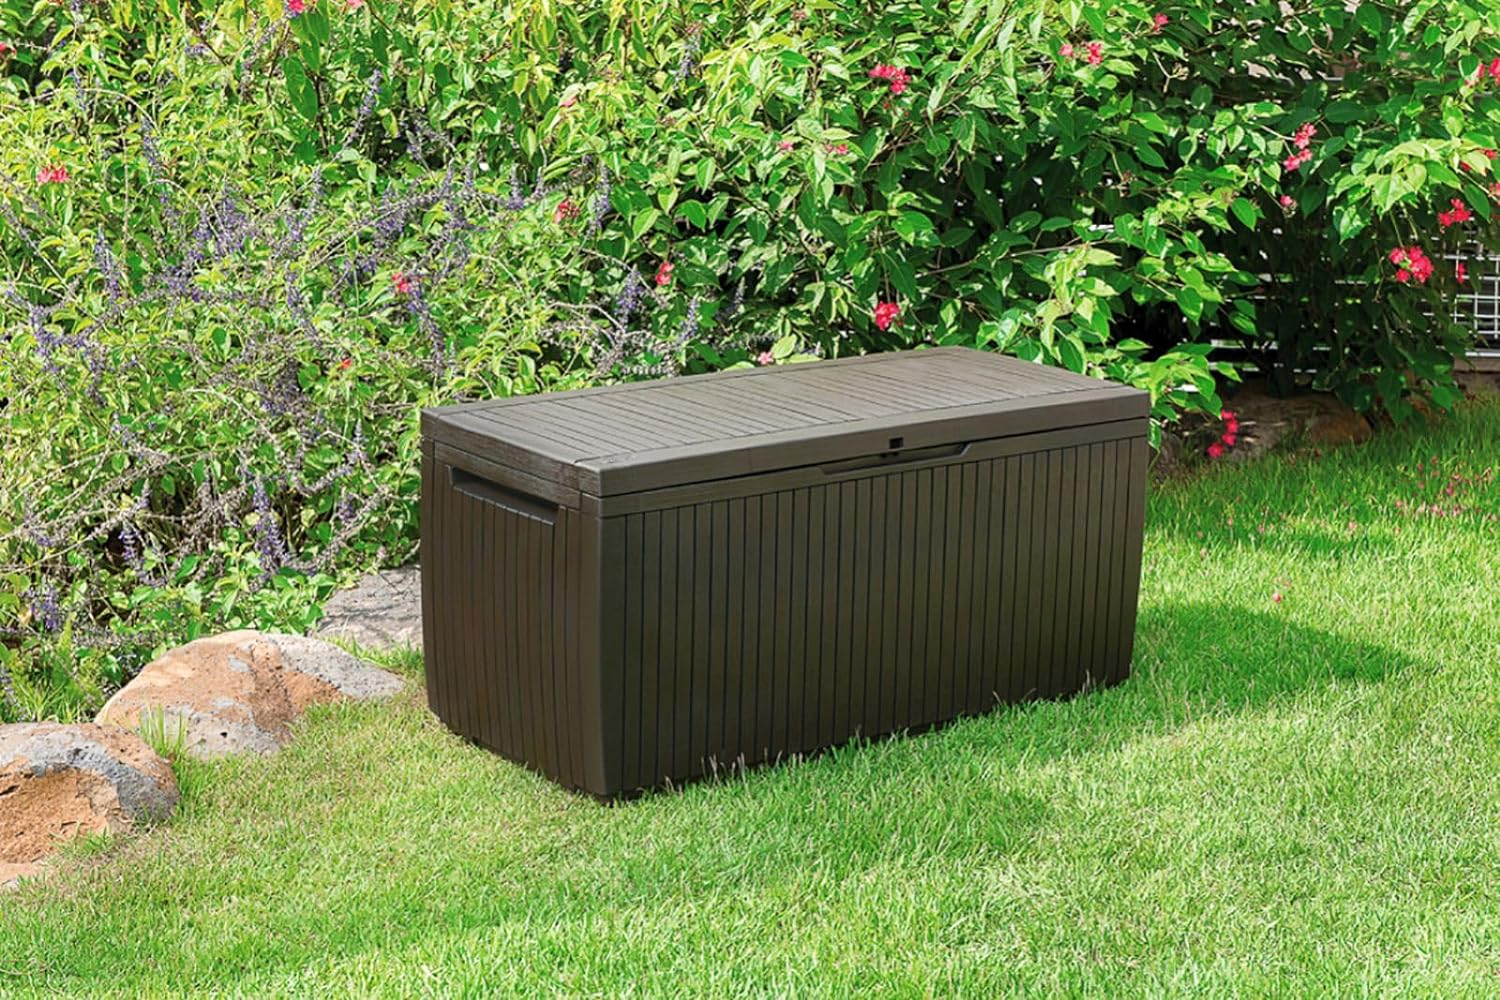 Keter Springwood 80 Gallon Resin Outdoor Storage Box for Patio Furniture Cushions, Pool Toys, and Garden Tools with Handles, Brown